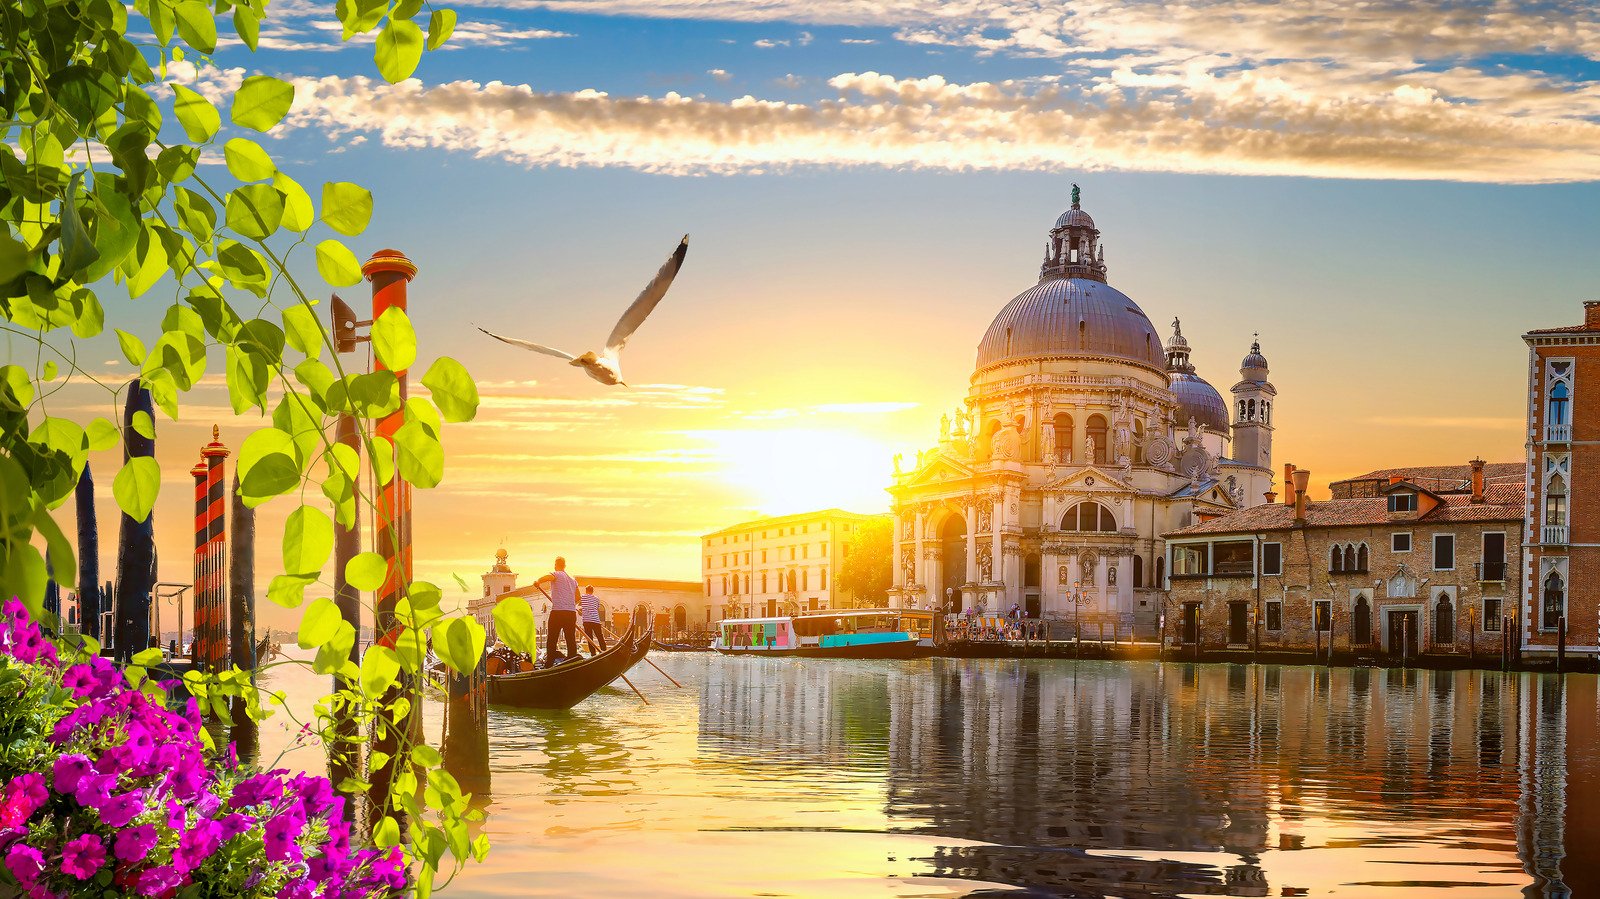 What Is The Summer Weather Like In Venice, Italy?